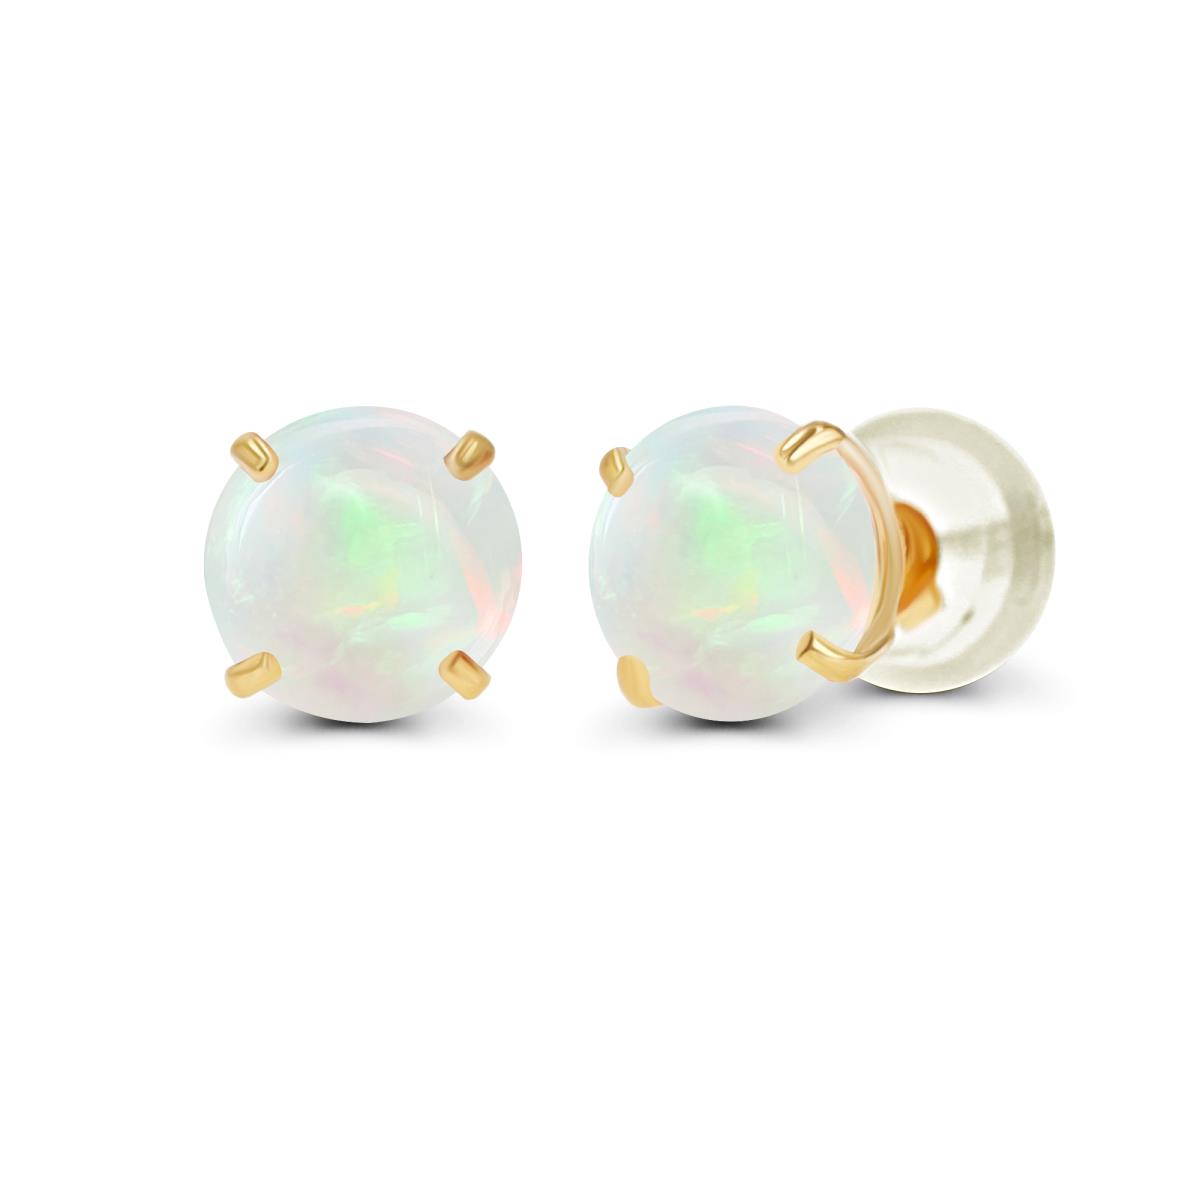 10K Yellow Gold 4.00mm Round Opal Stud Earring